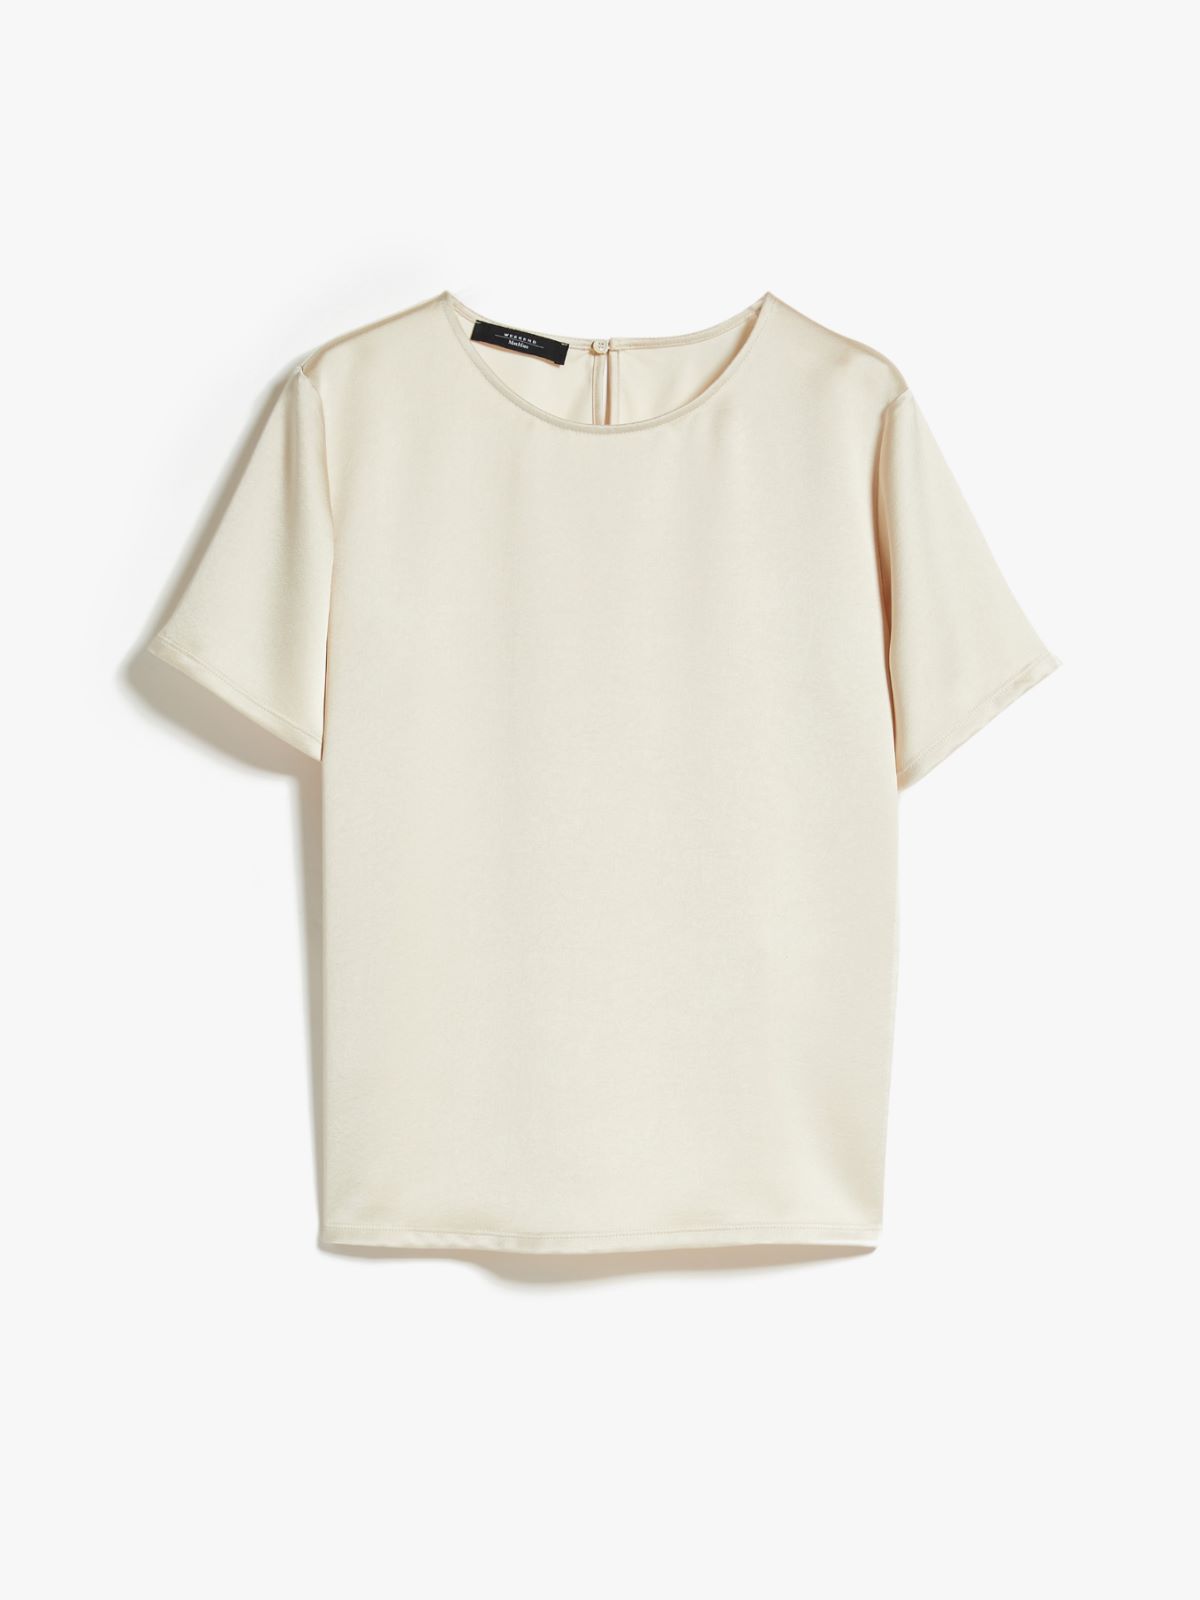 Blouse in satin and jersey, ivory | Weekend Max Mara